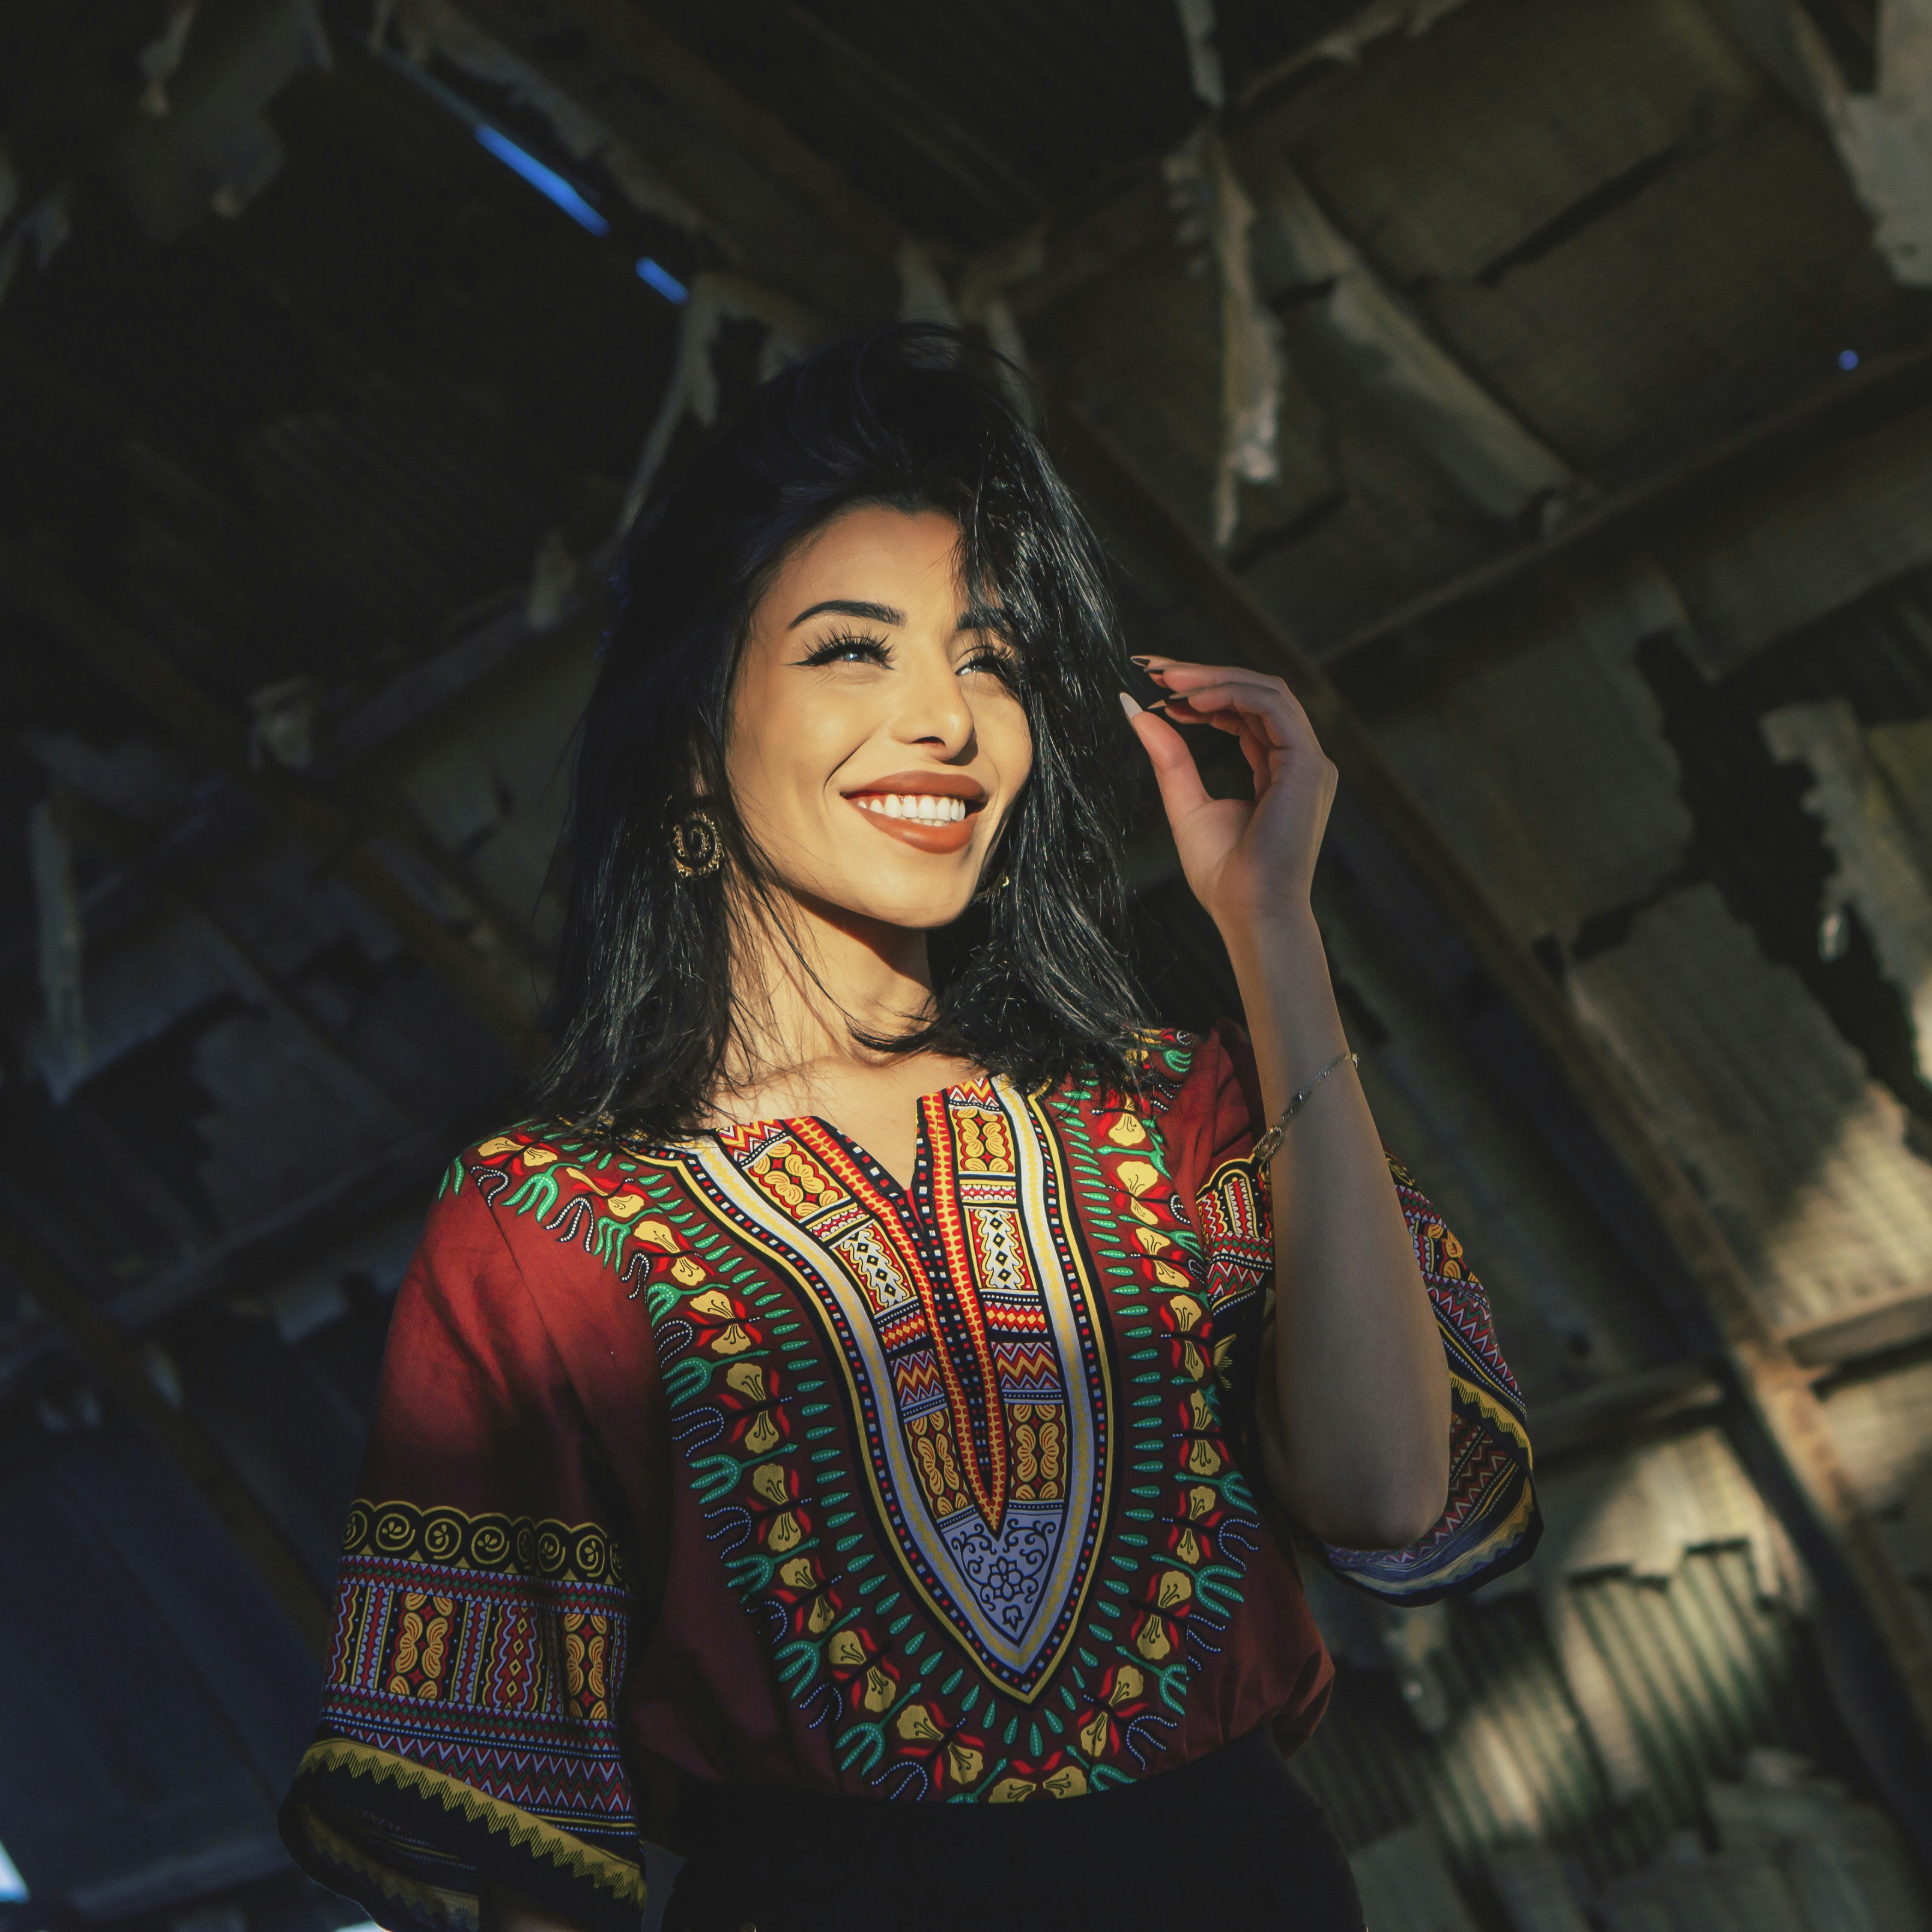 Arab Woman Pictures Download Free Images on Unsplash